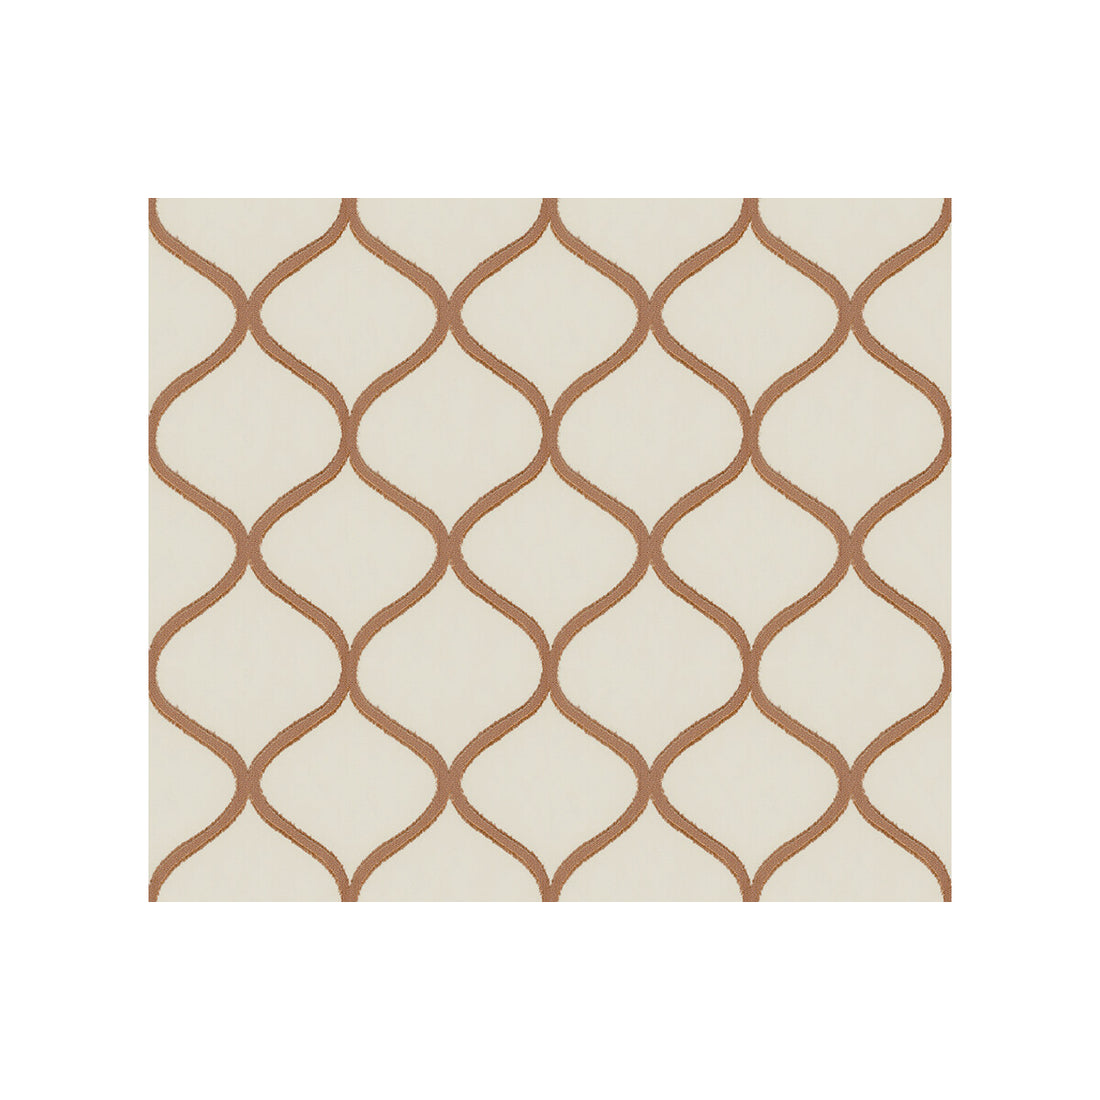 Liona fabric in copper color - pattern 3895.640.0 - by Kravet Contract